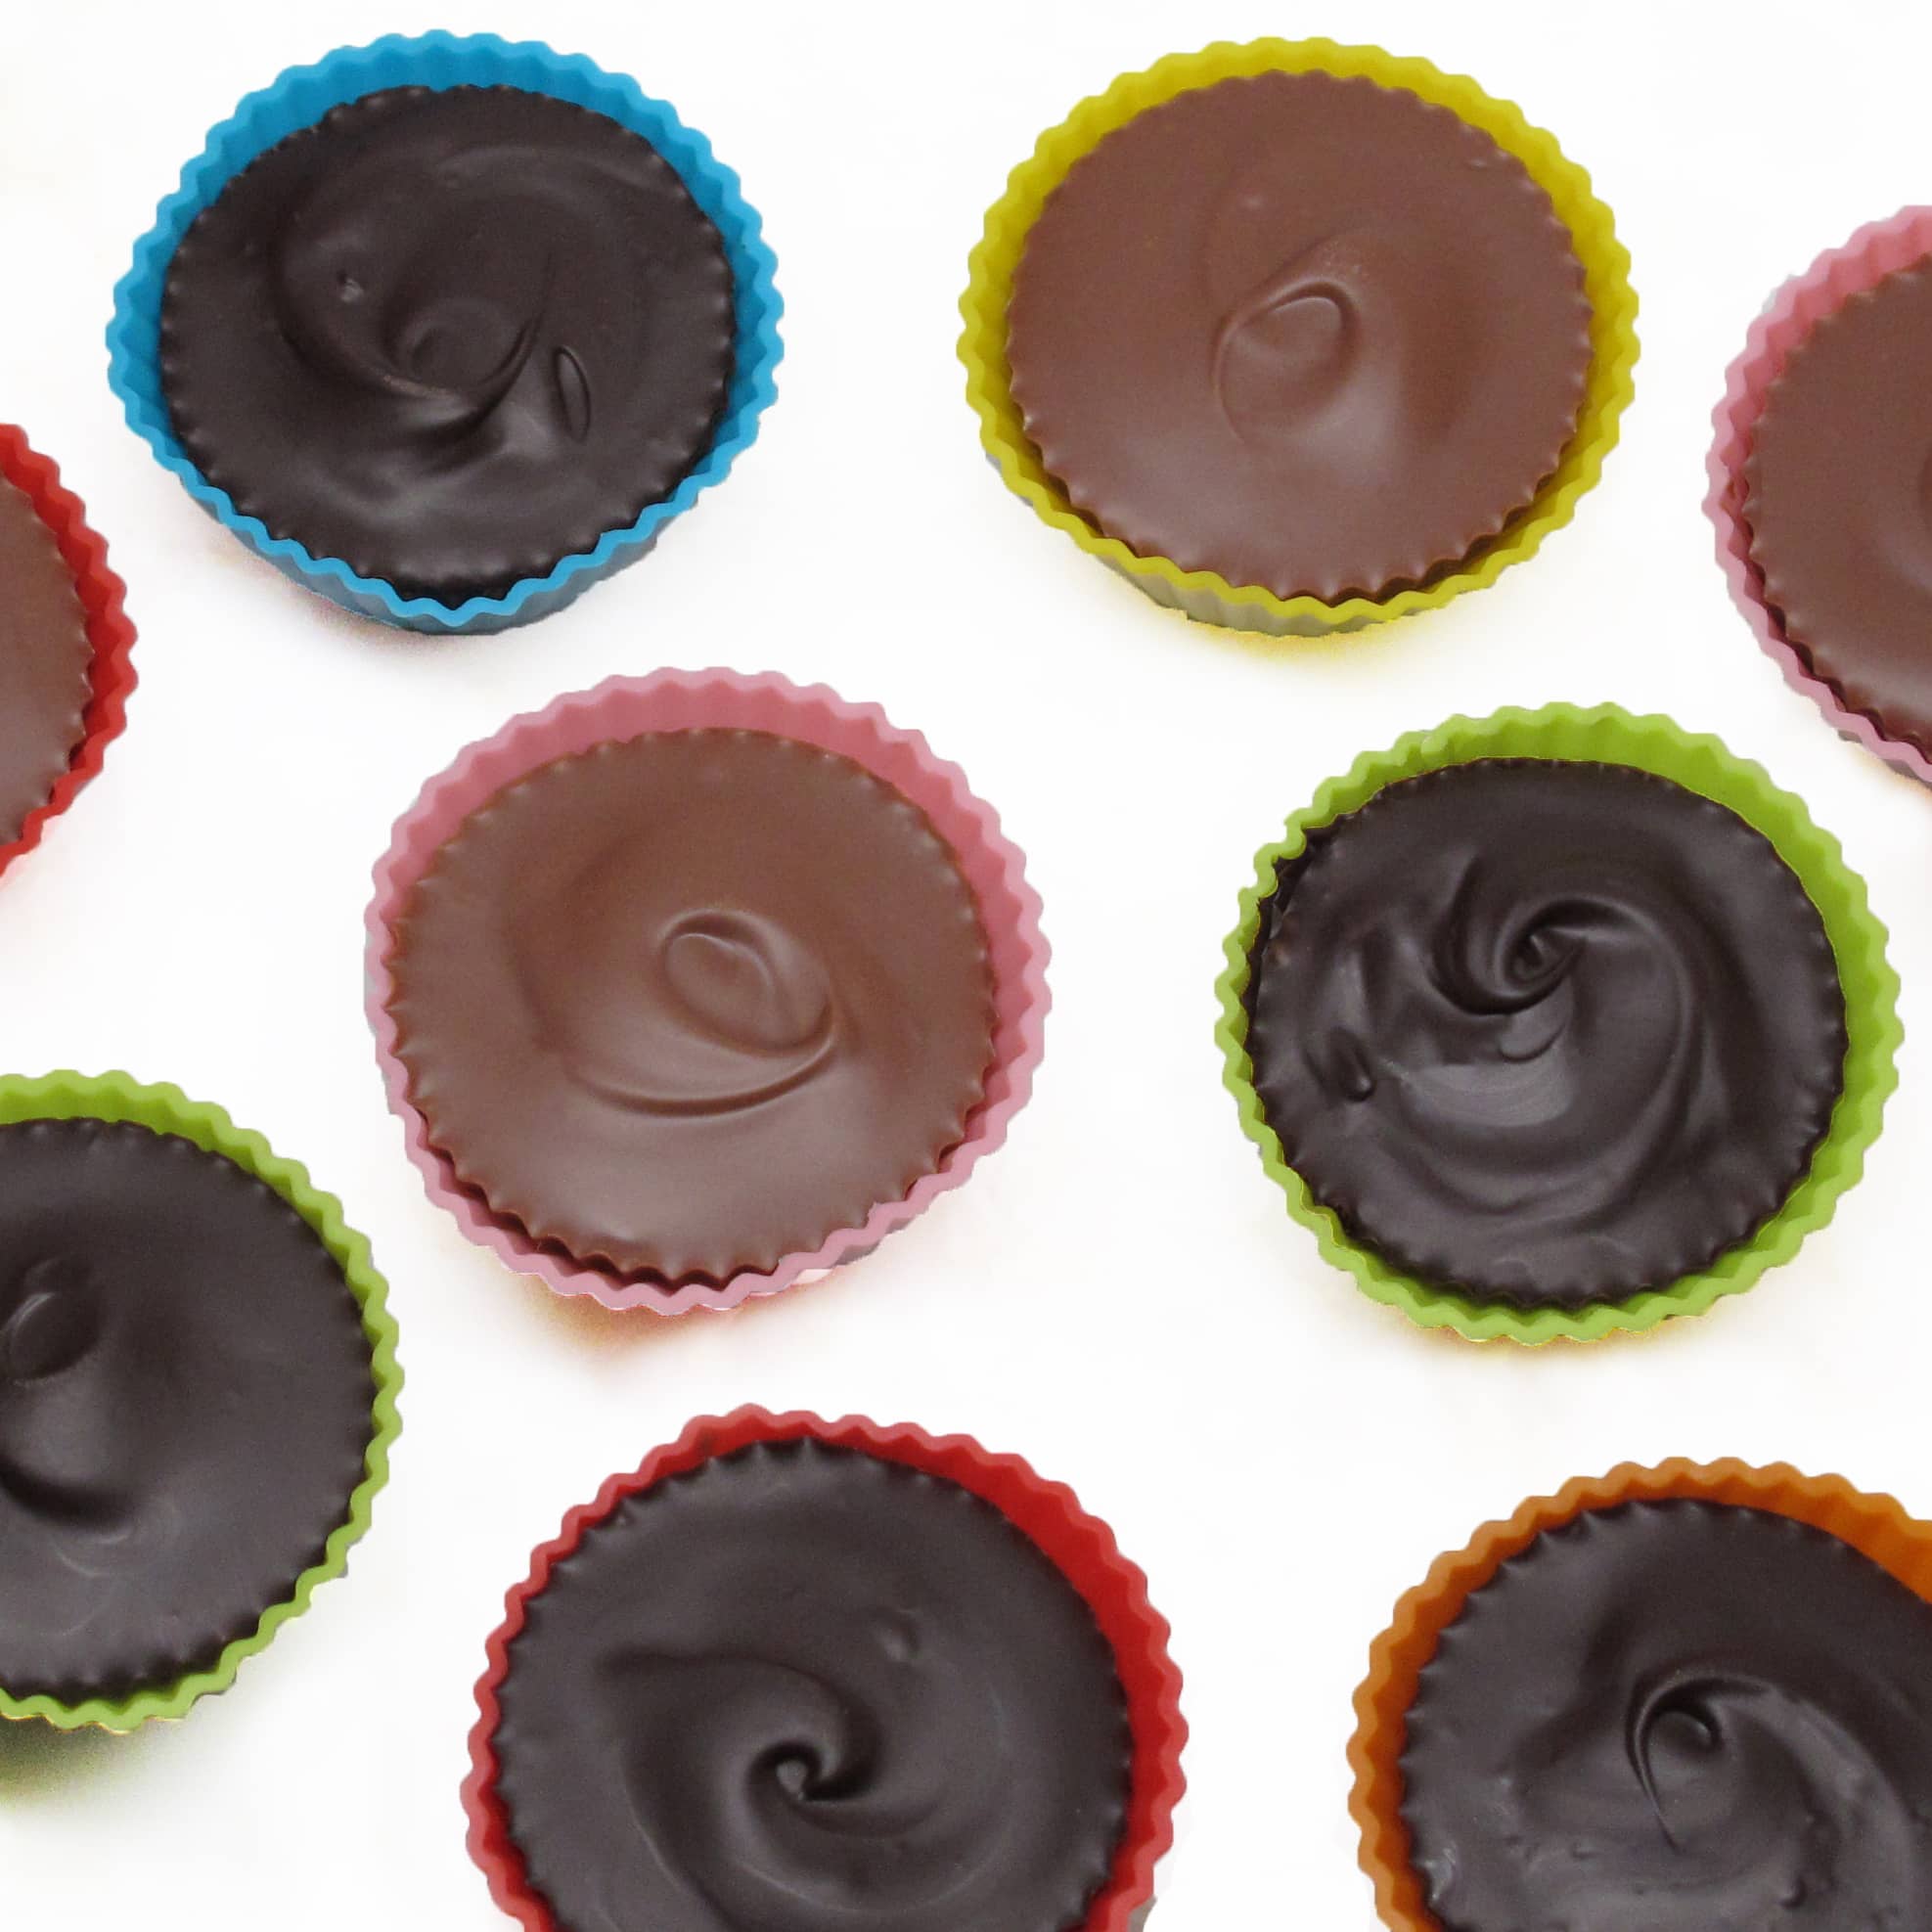 Peanut butter cups in silicone chocolate molds